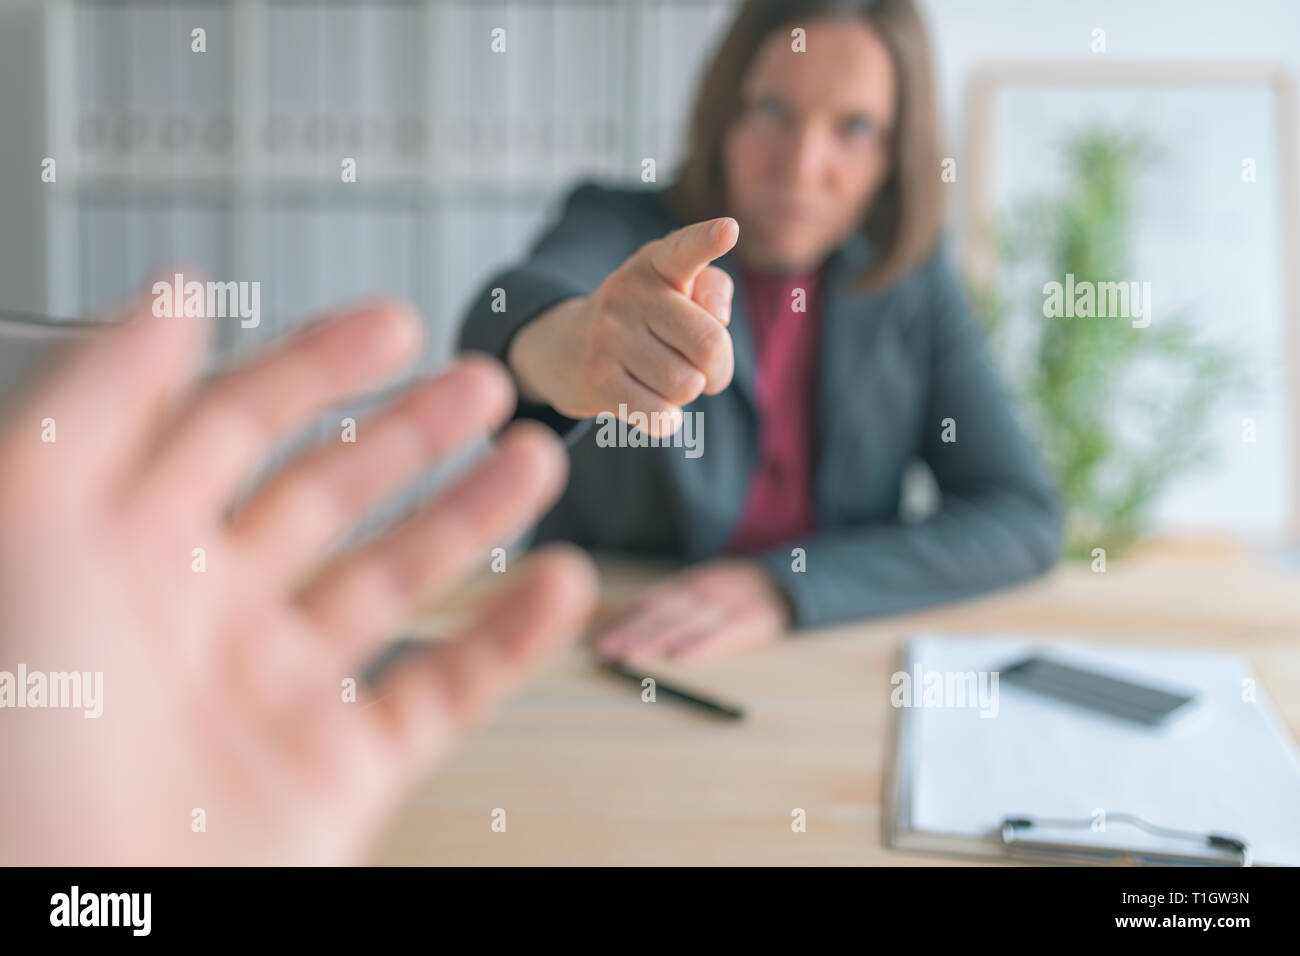 Boss threatening employee with finger in business office, conceptual image with selective focus Stock Photo